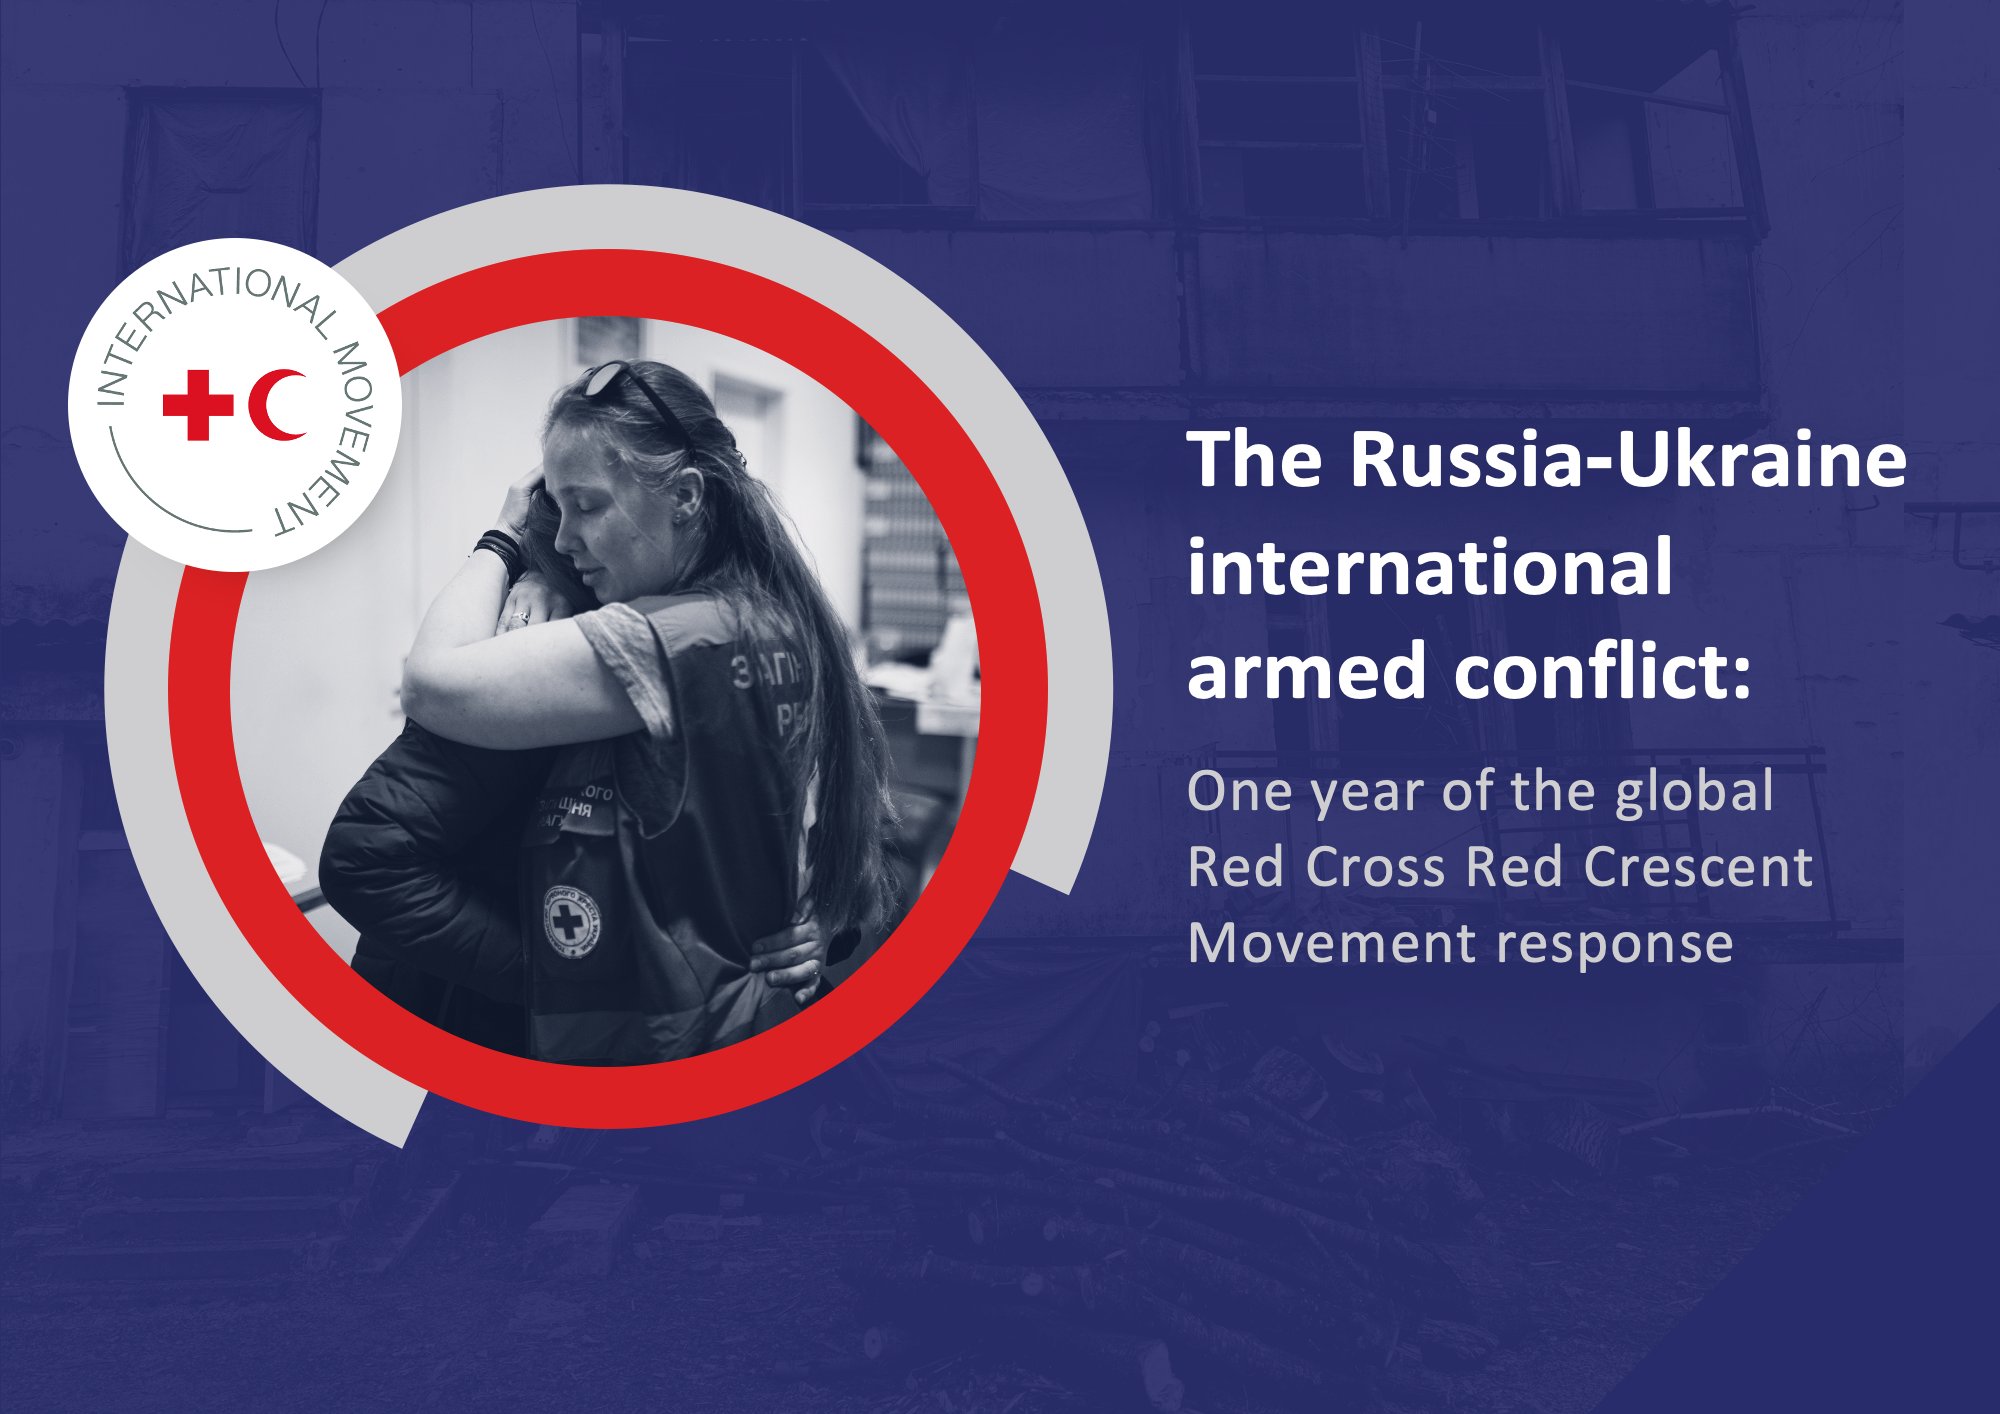 ICRC on Twitter: "For the past year, the Red Cross Red Crescent Movement has been responding to the humanitarian needs of people affected the Russia-Ukraine international armed conflict. Learn more